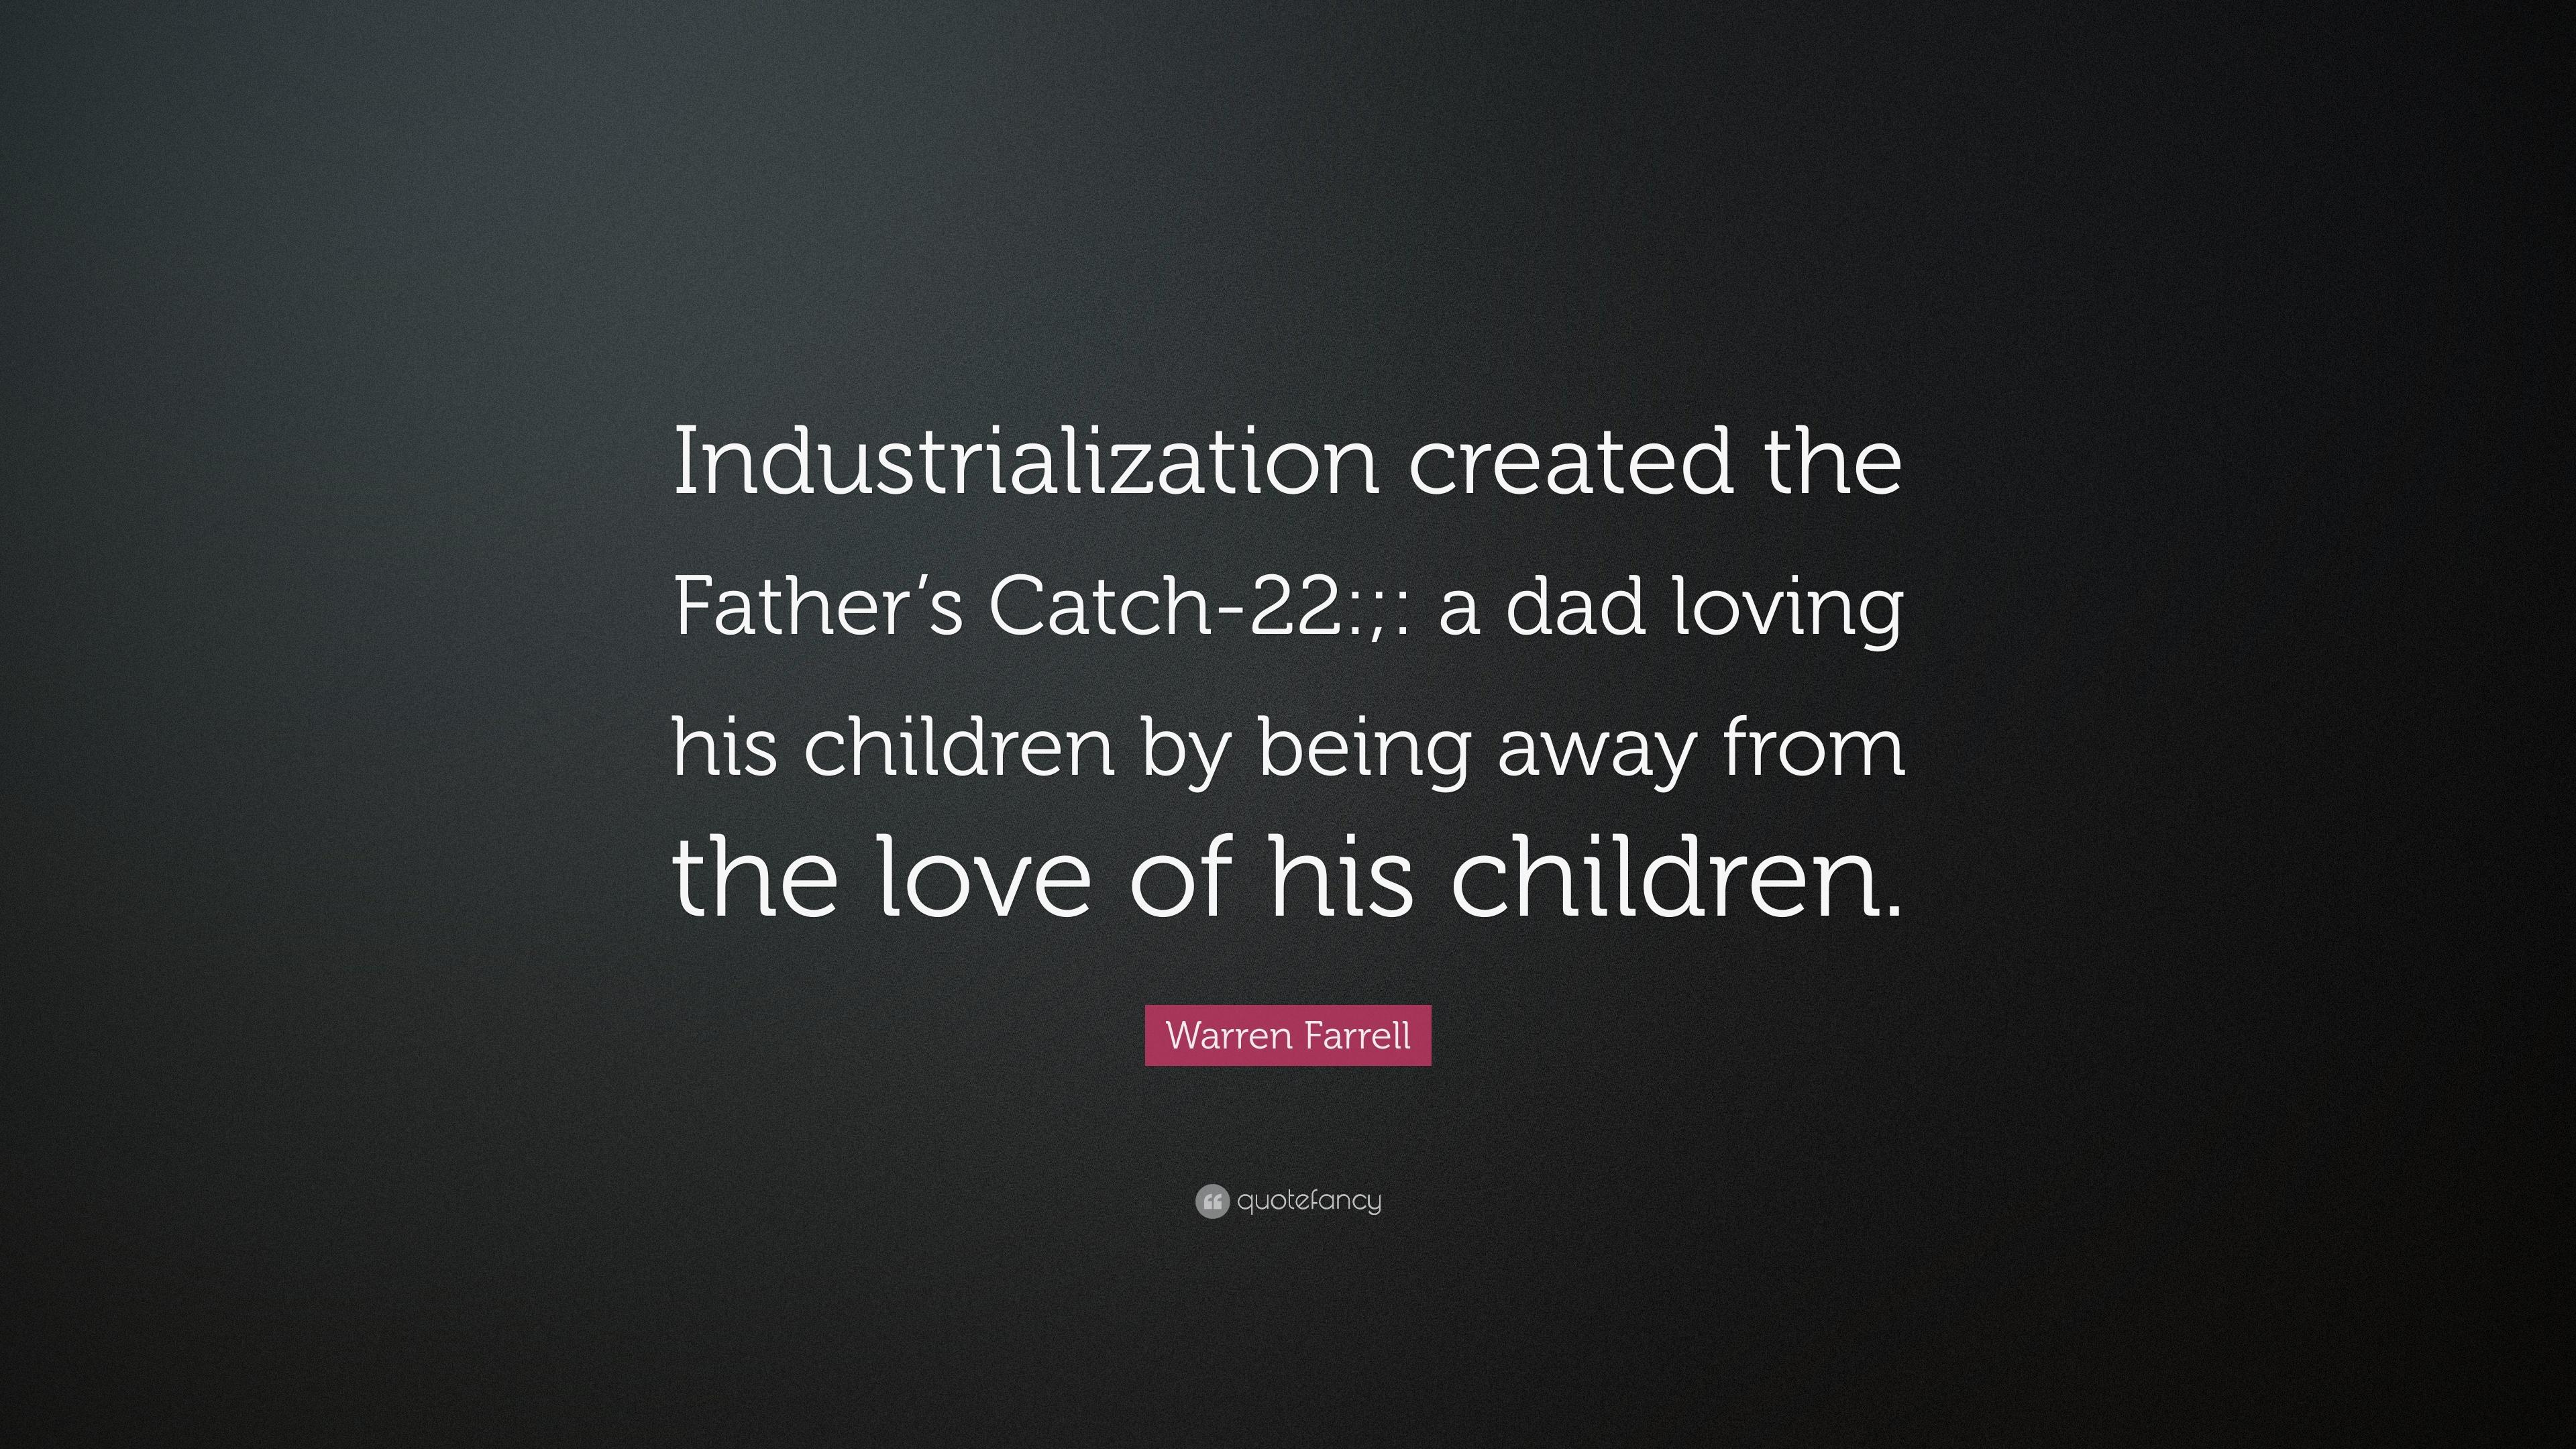 Warren Farrell Quote: “Industrialization created the Father's Catch